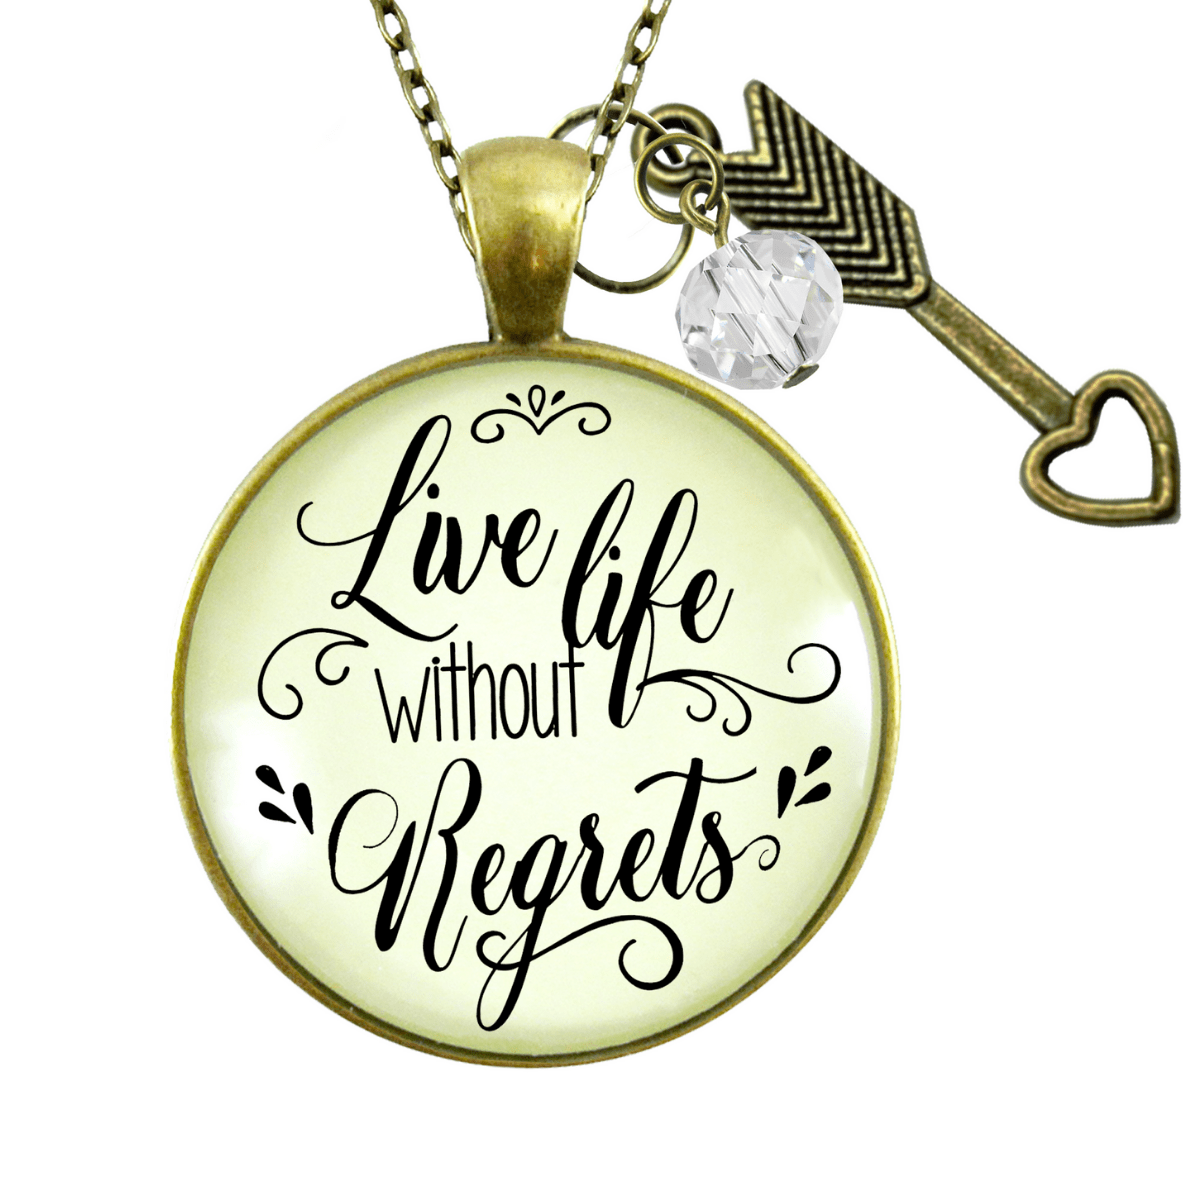 Gutsy Goodness Live Life Without Regrets Necklace Motivational Jewelry Arrow Charm - Gutsy Goodness;Live Life Without Regrets Necklace Motivational Jewelry Arrow Charm - Gutsy Goodness Handmade Jewelry Gifts